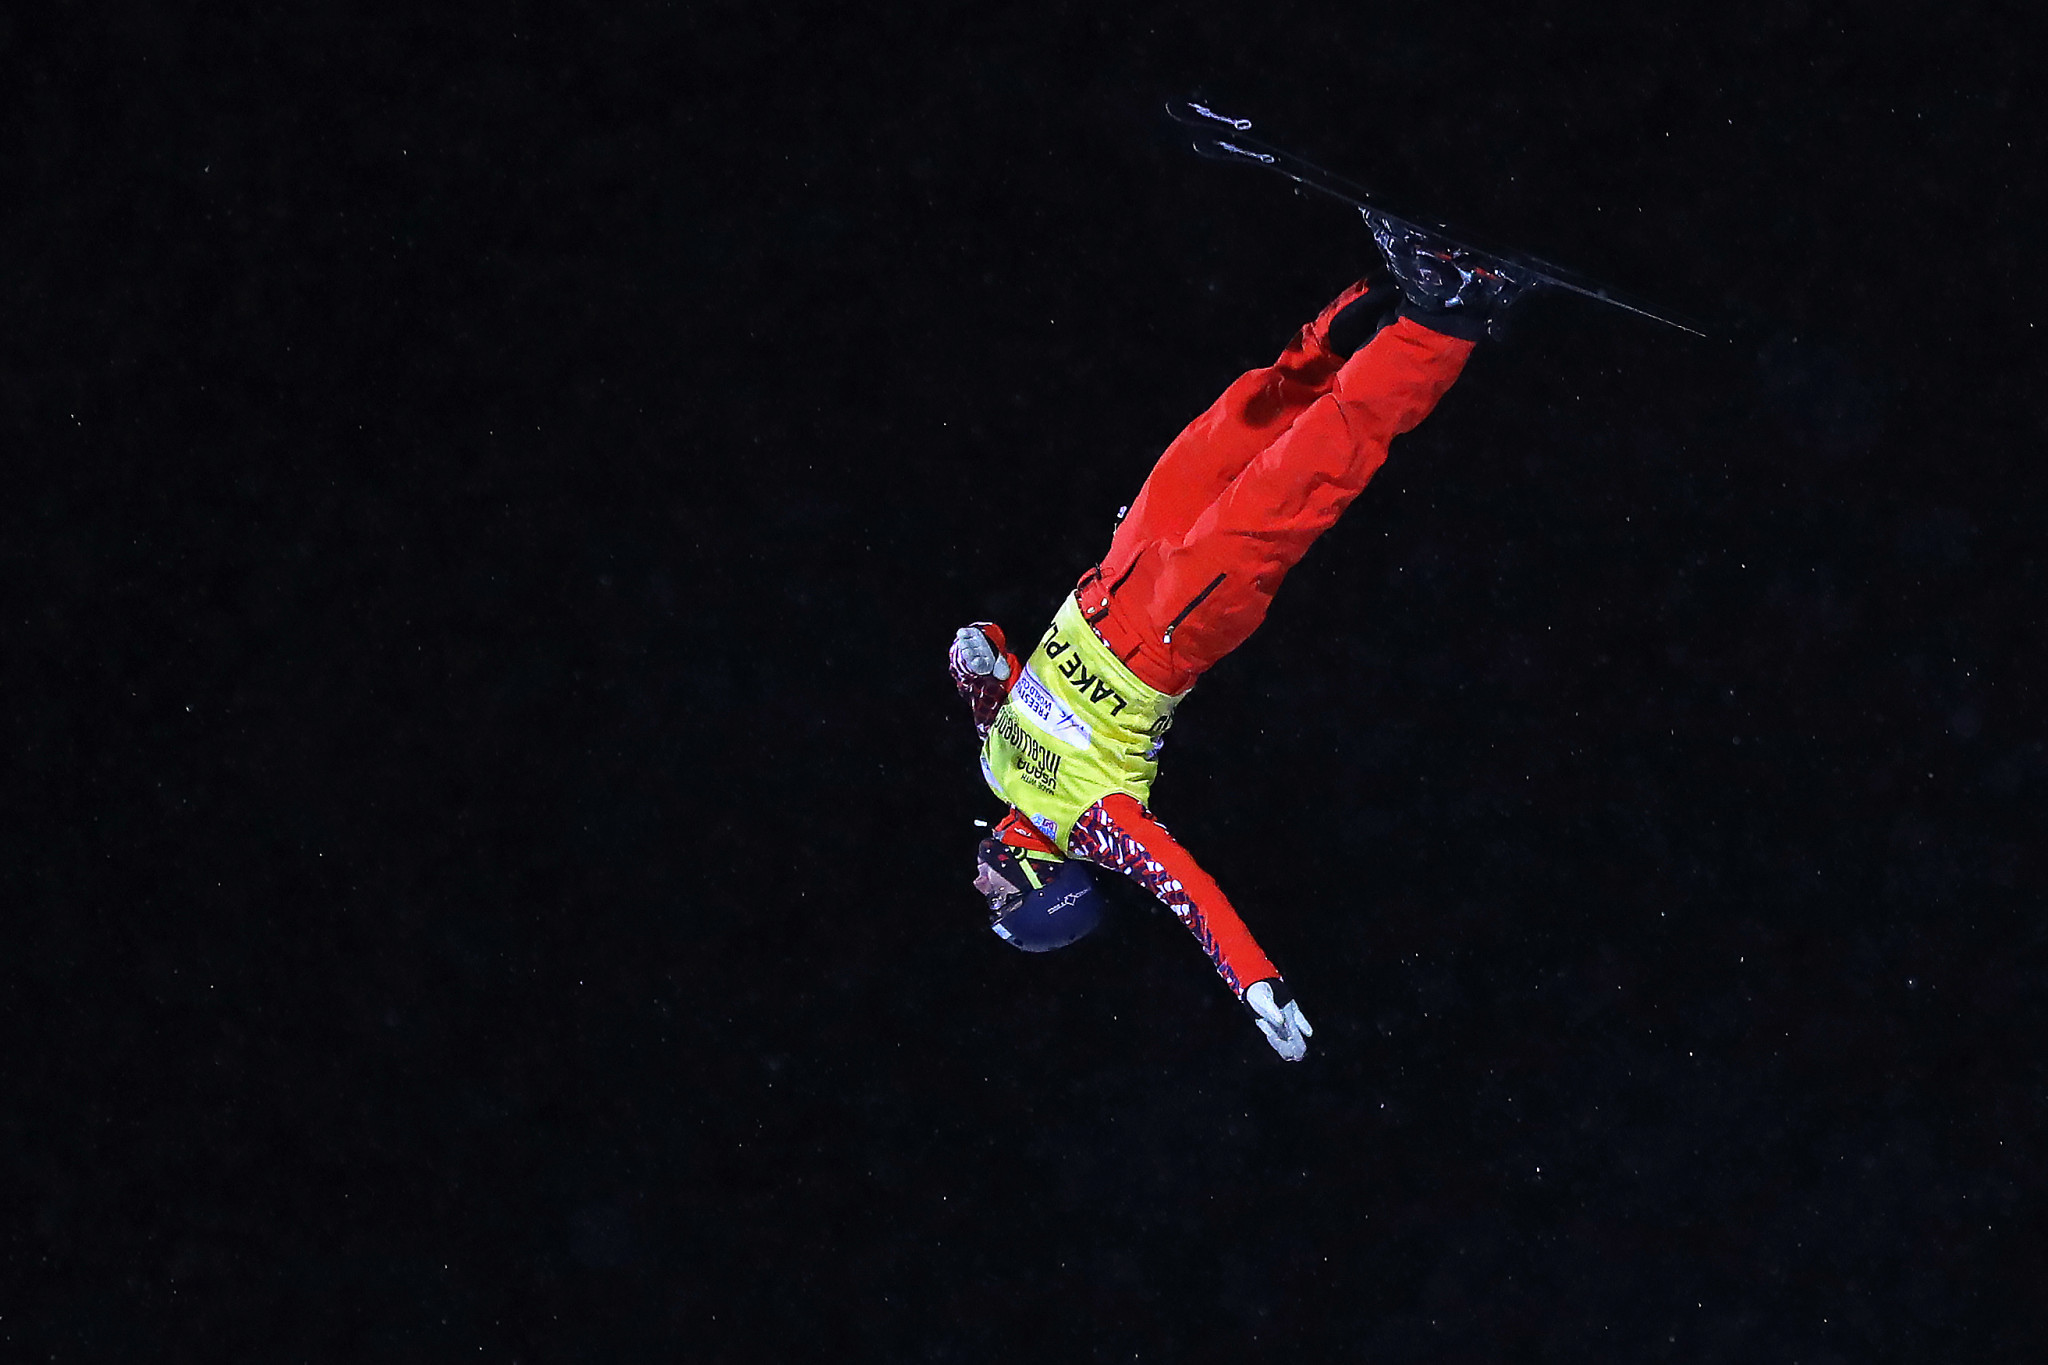 Burov continues FIS Aerials World Cup dominance with fifth victory in Minsk